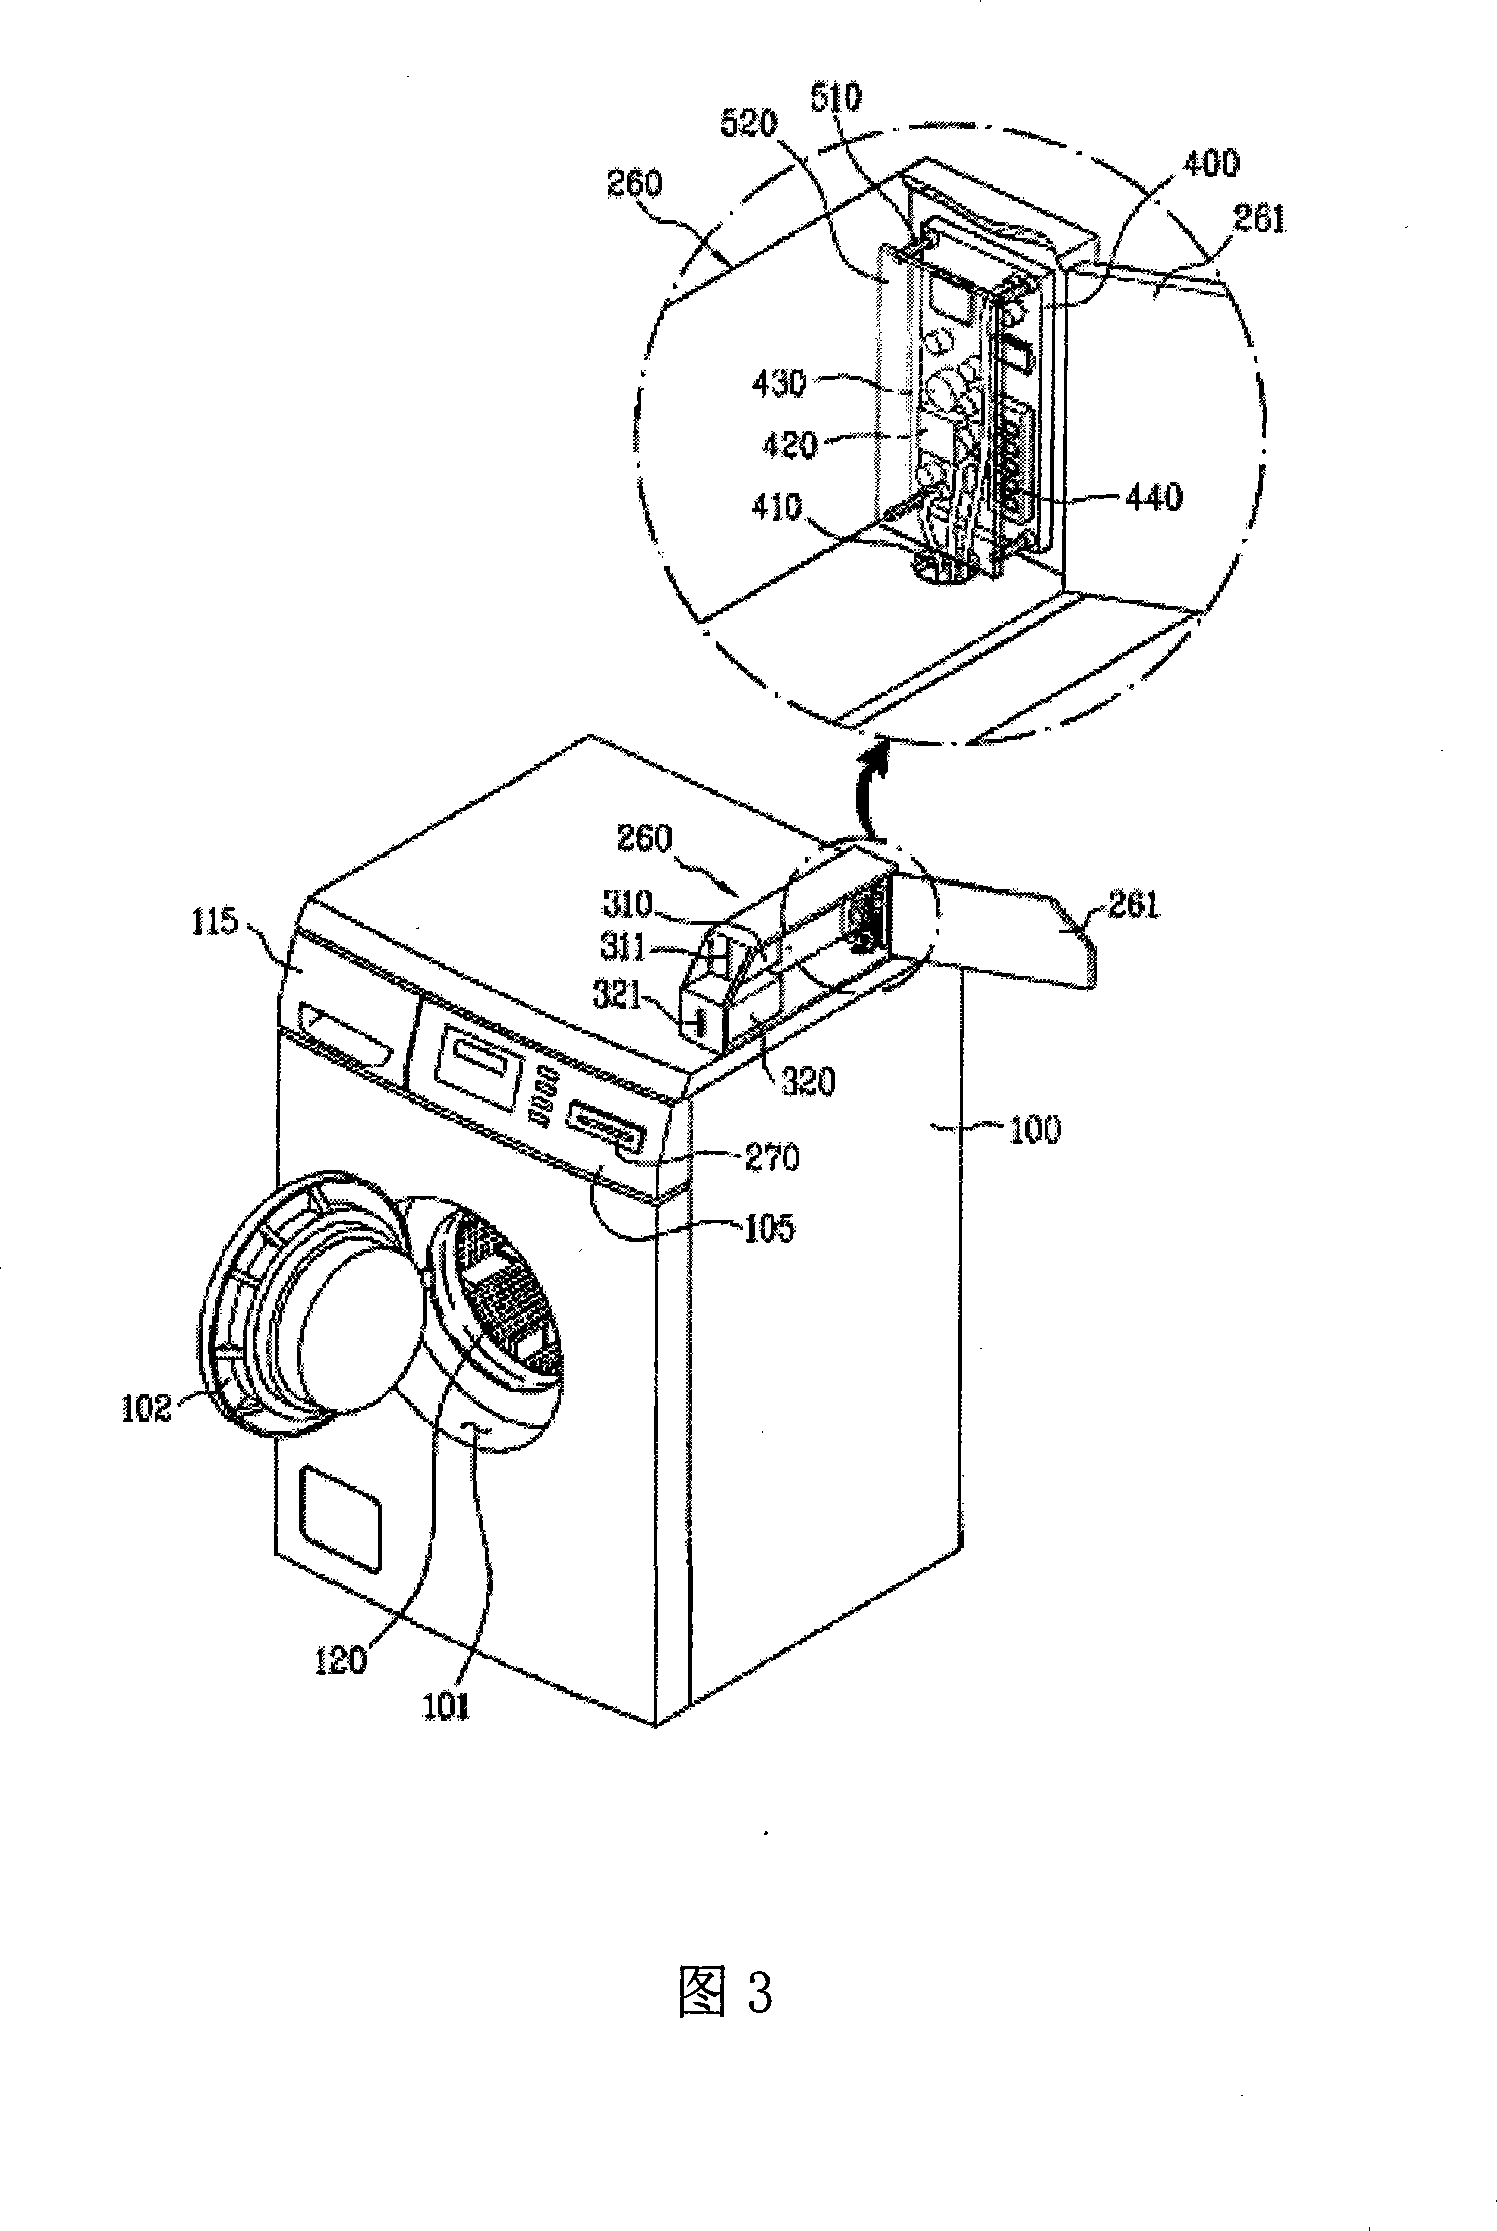 Apparatus for processing commercial clothings